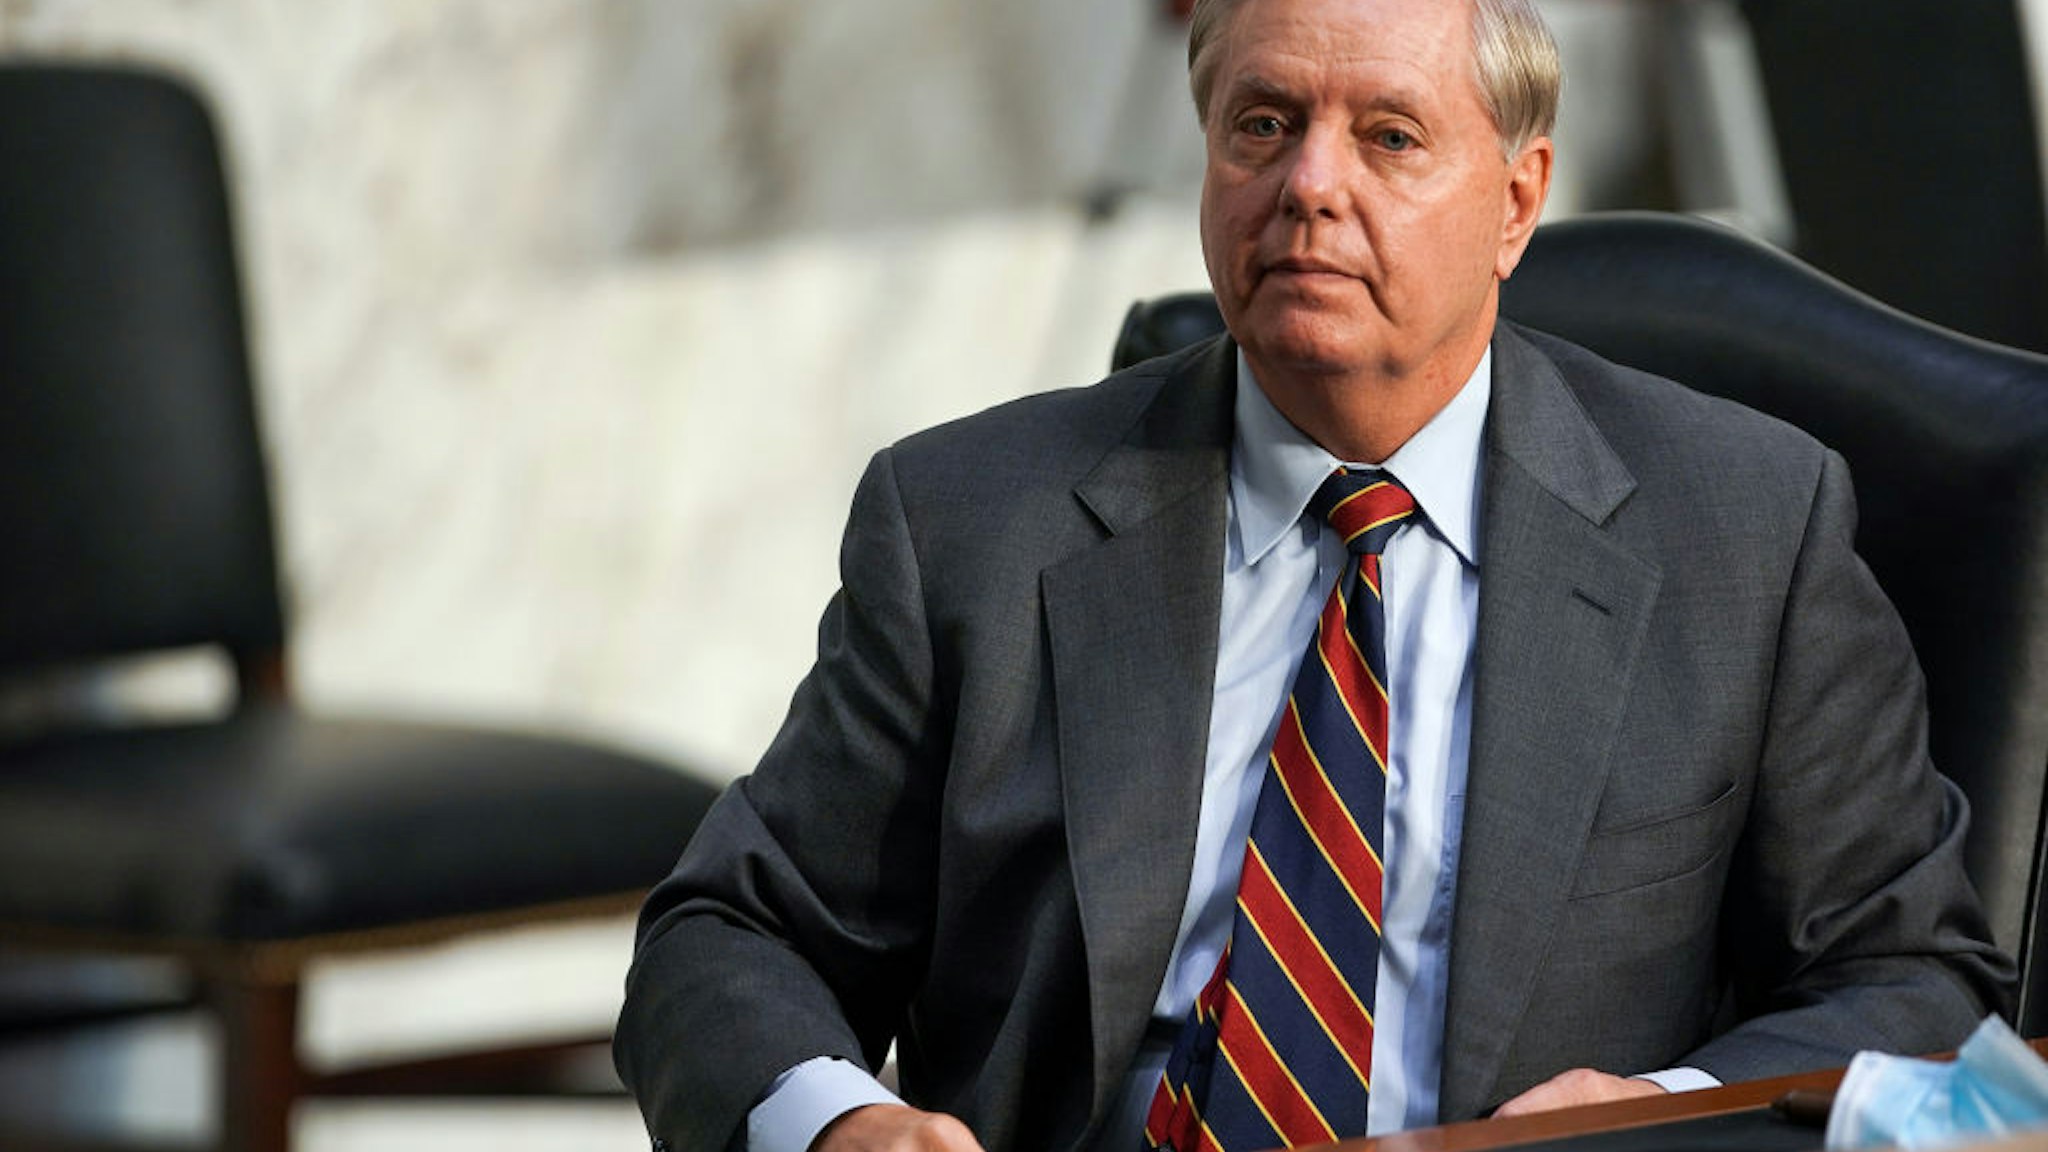 Lindsey Graham (R-SC) is seen during the Senate Judiciary Committee on the second day of Amy Coney Barrett’s Supreme Court confirmation hearing on Capitol Hill on October 13, 2020 in Washington, DC.